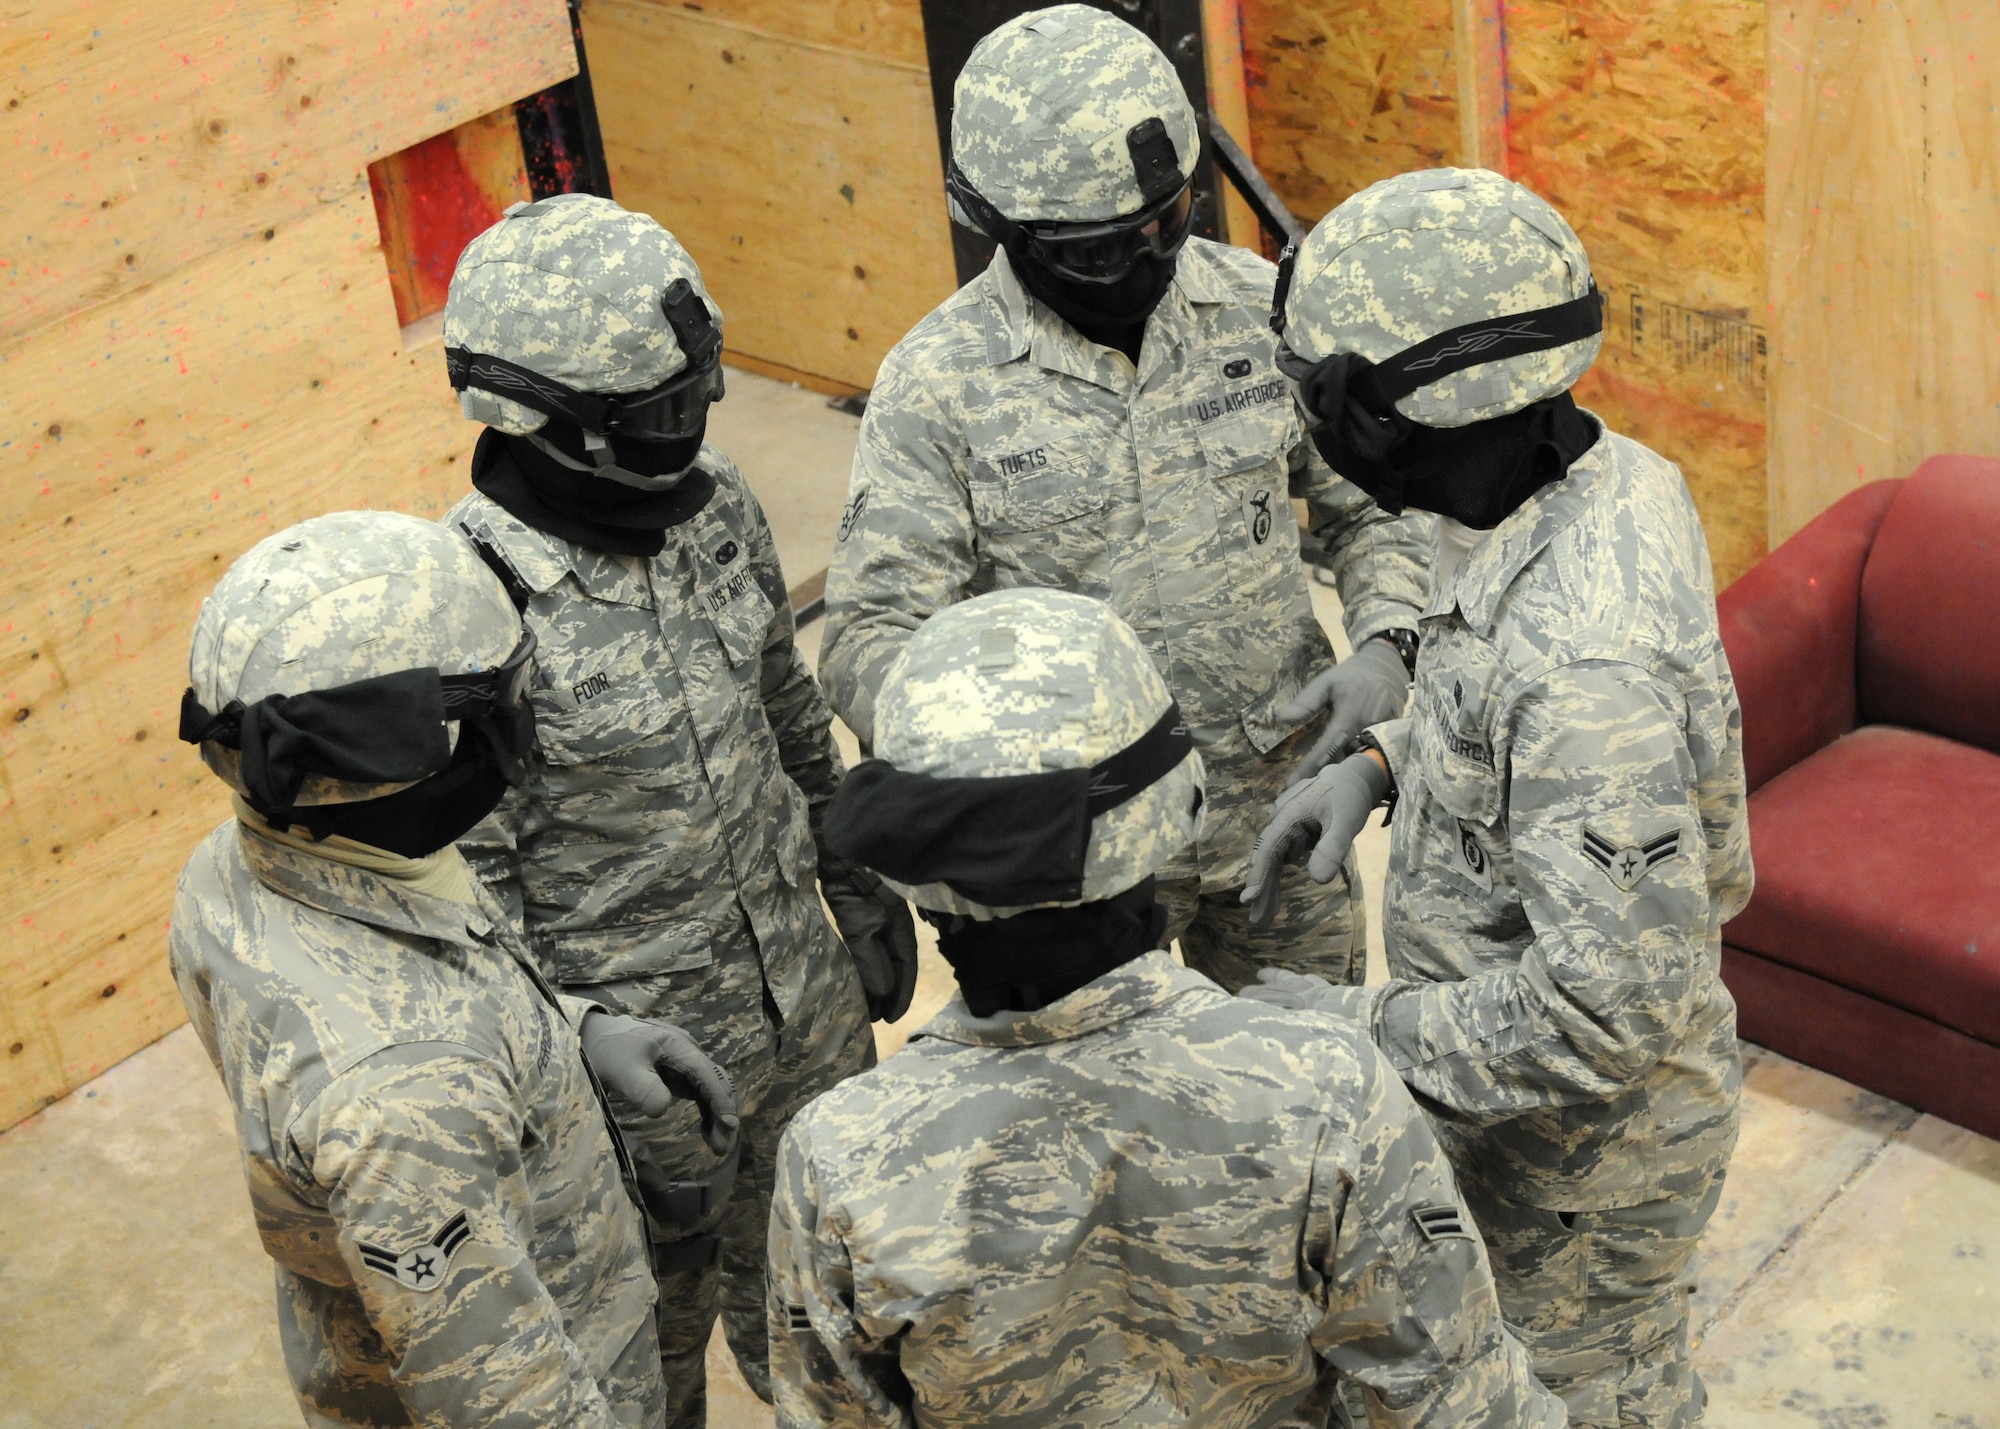 Security forces Airmen discuss their strategy prior to an active shooter scenario Dec. 22, 2014, in the shoot house on F.E. Warren Air Force Base, Wyo. During the training Airmen are taught the importance of teamwork and to go directly to the threat . (U.S. Air Force photo/Airman 1st Class Malcolm Mayfield)